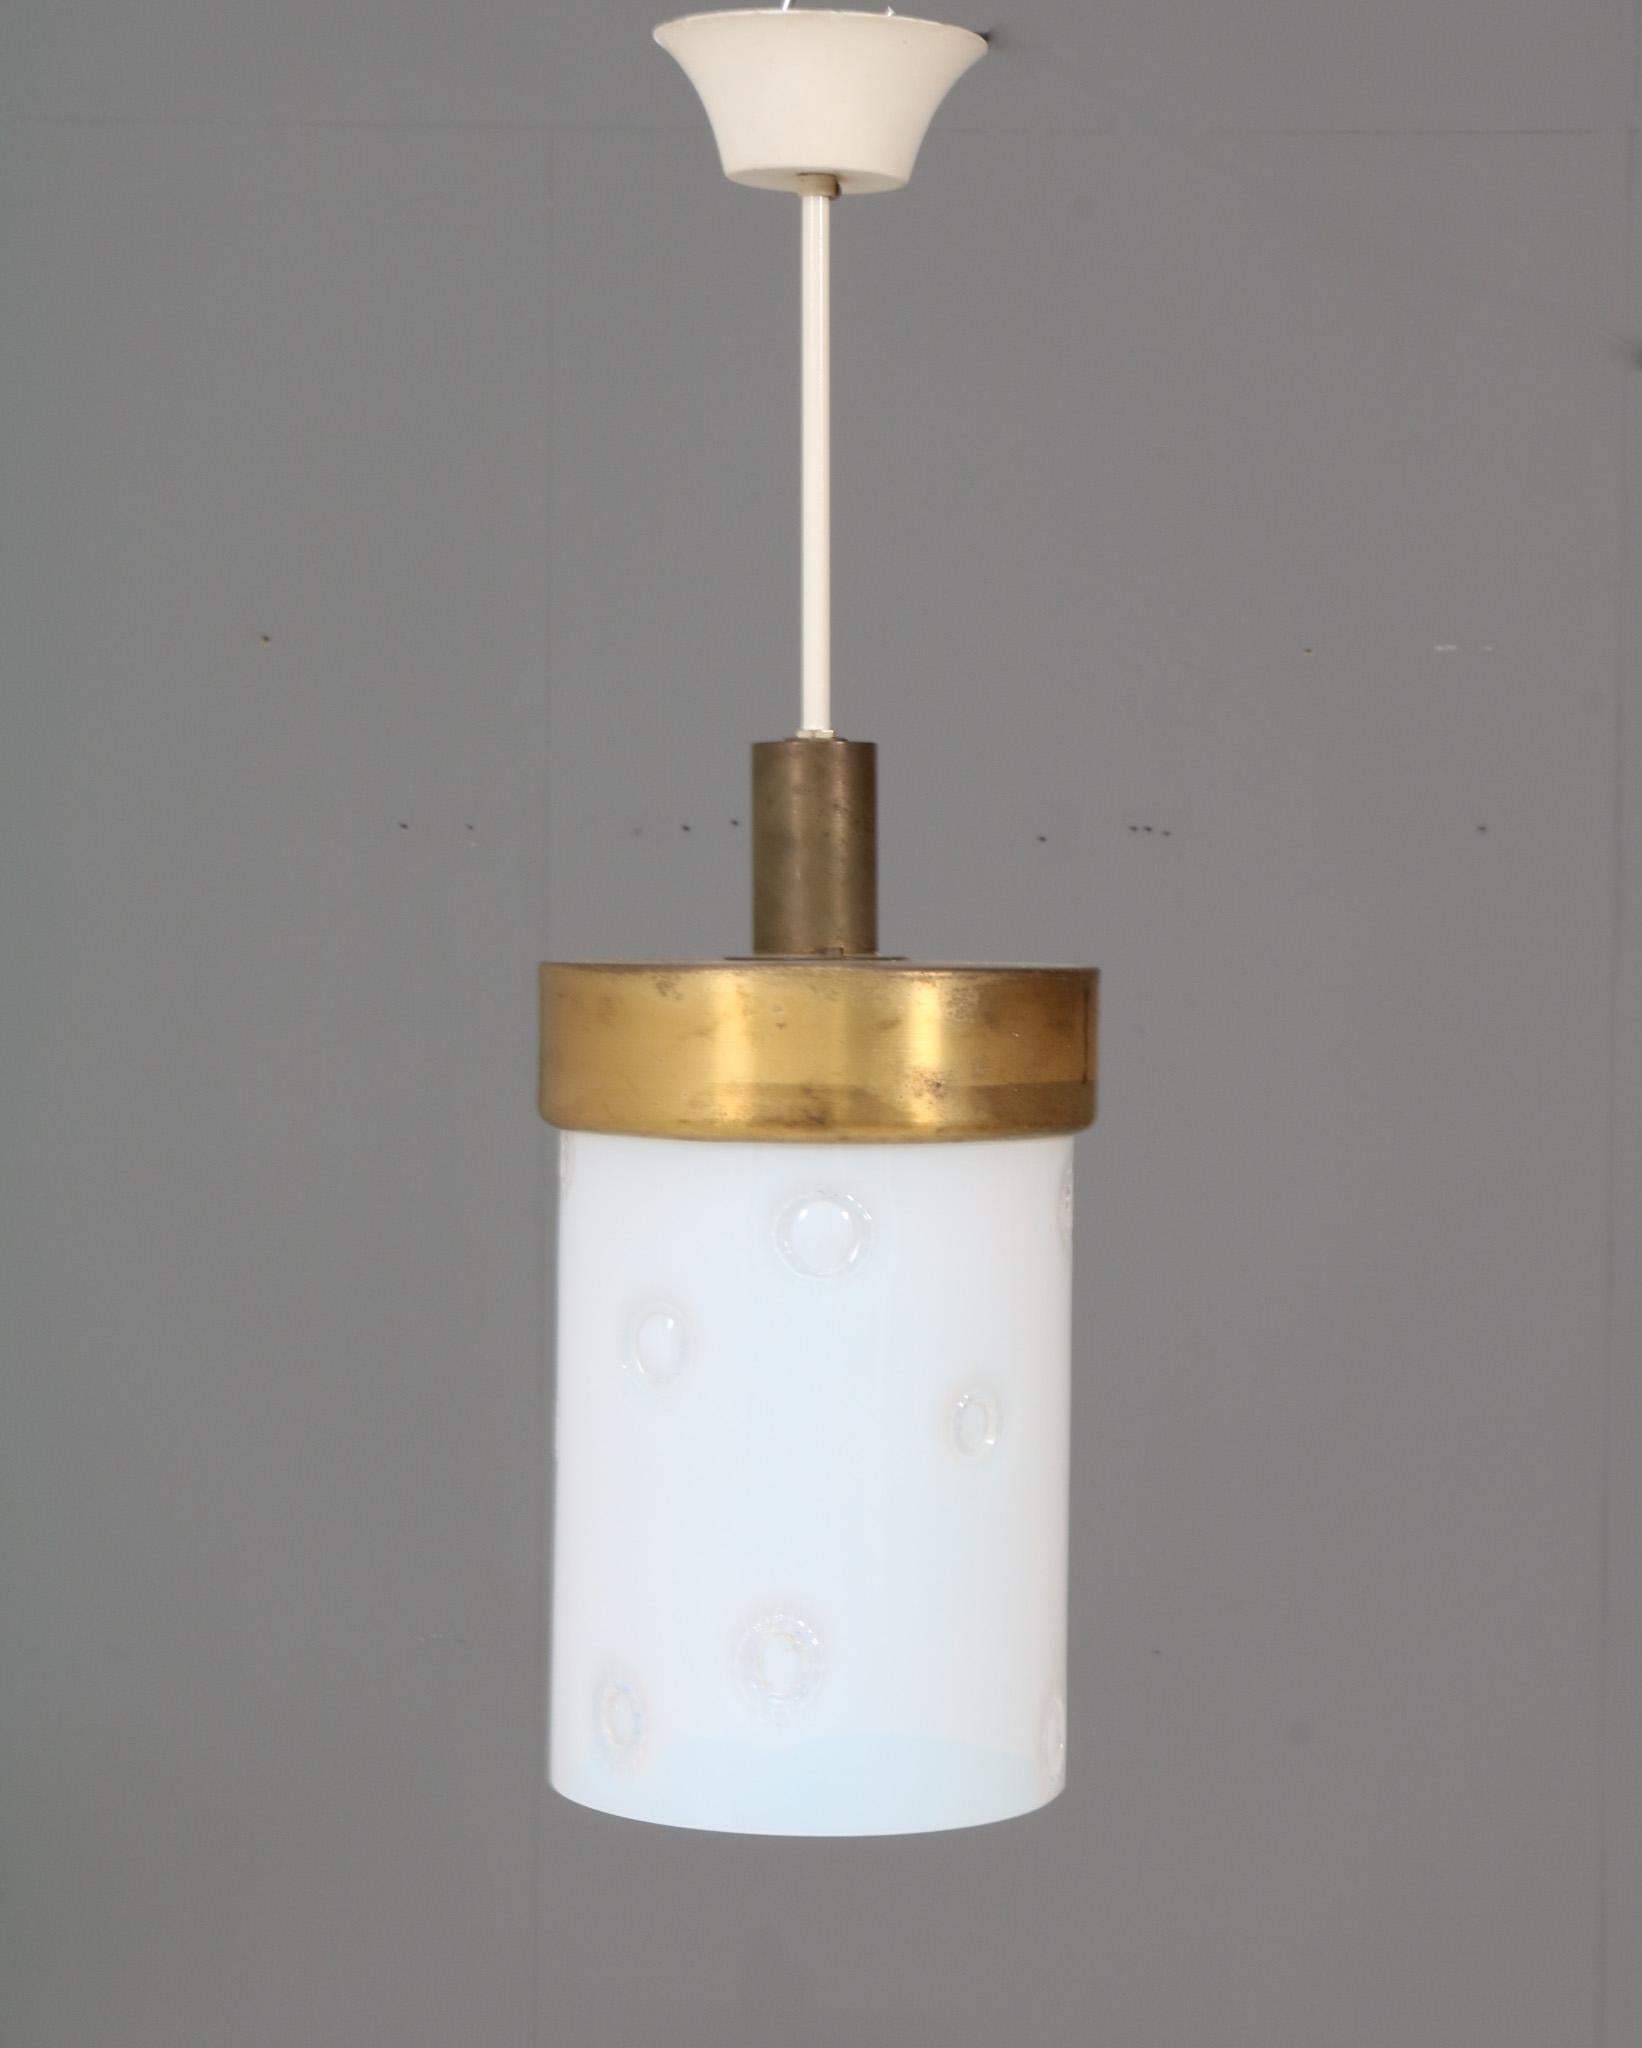 Stunning and rare Mid-Century Modern Murano pendant lamp.
Striking Italian design from the 1960s.
Patinated bronze and white lacquered metal frame with original Murano milk glass shade.
This wonderful Mid-Century Modern Murano lamp is in very good